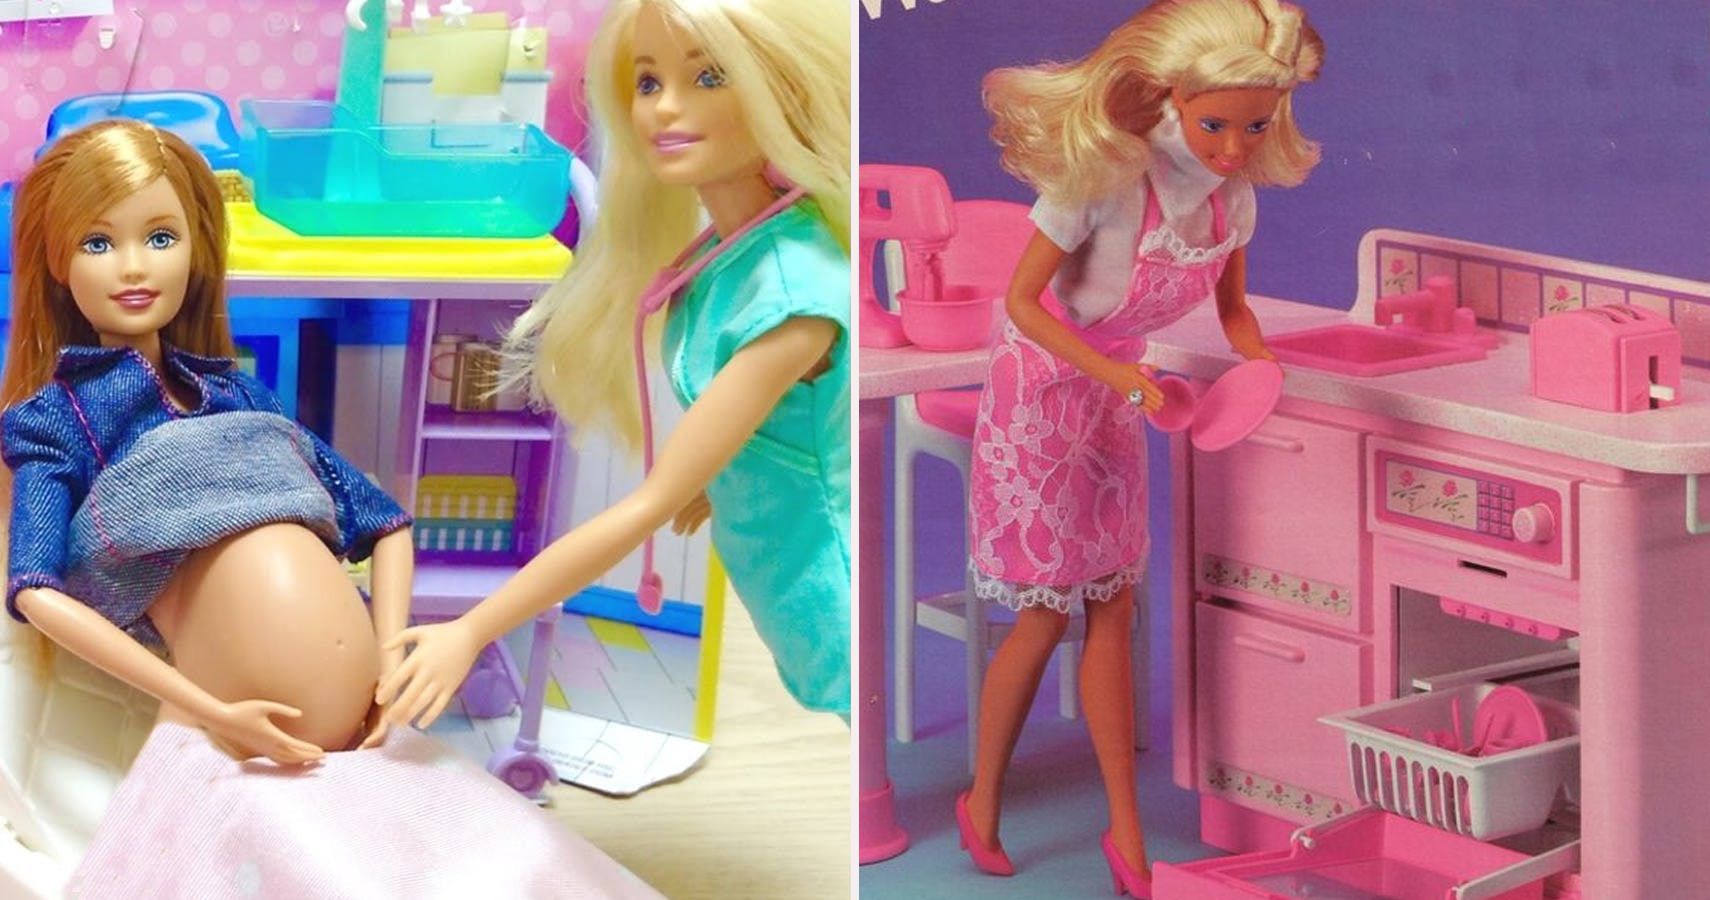 Being Weird Barbie. She's been played with too hard.